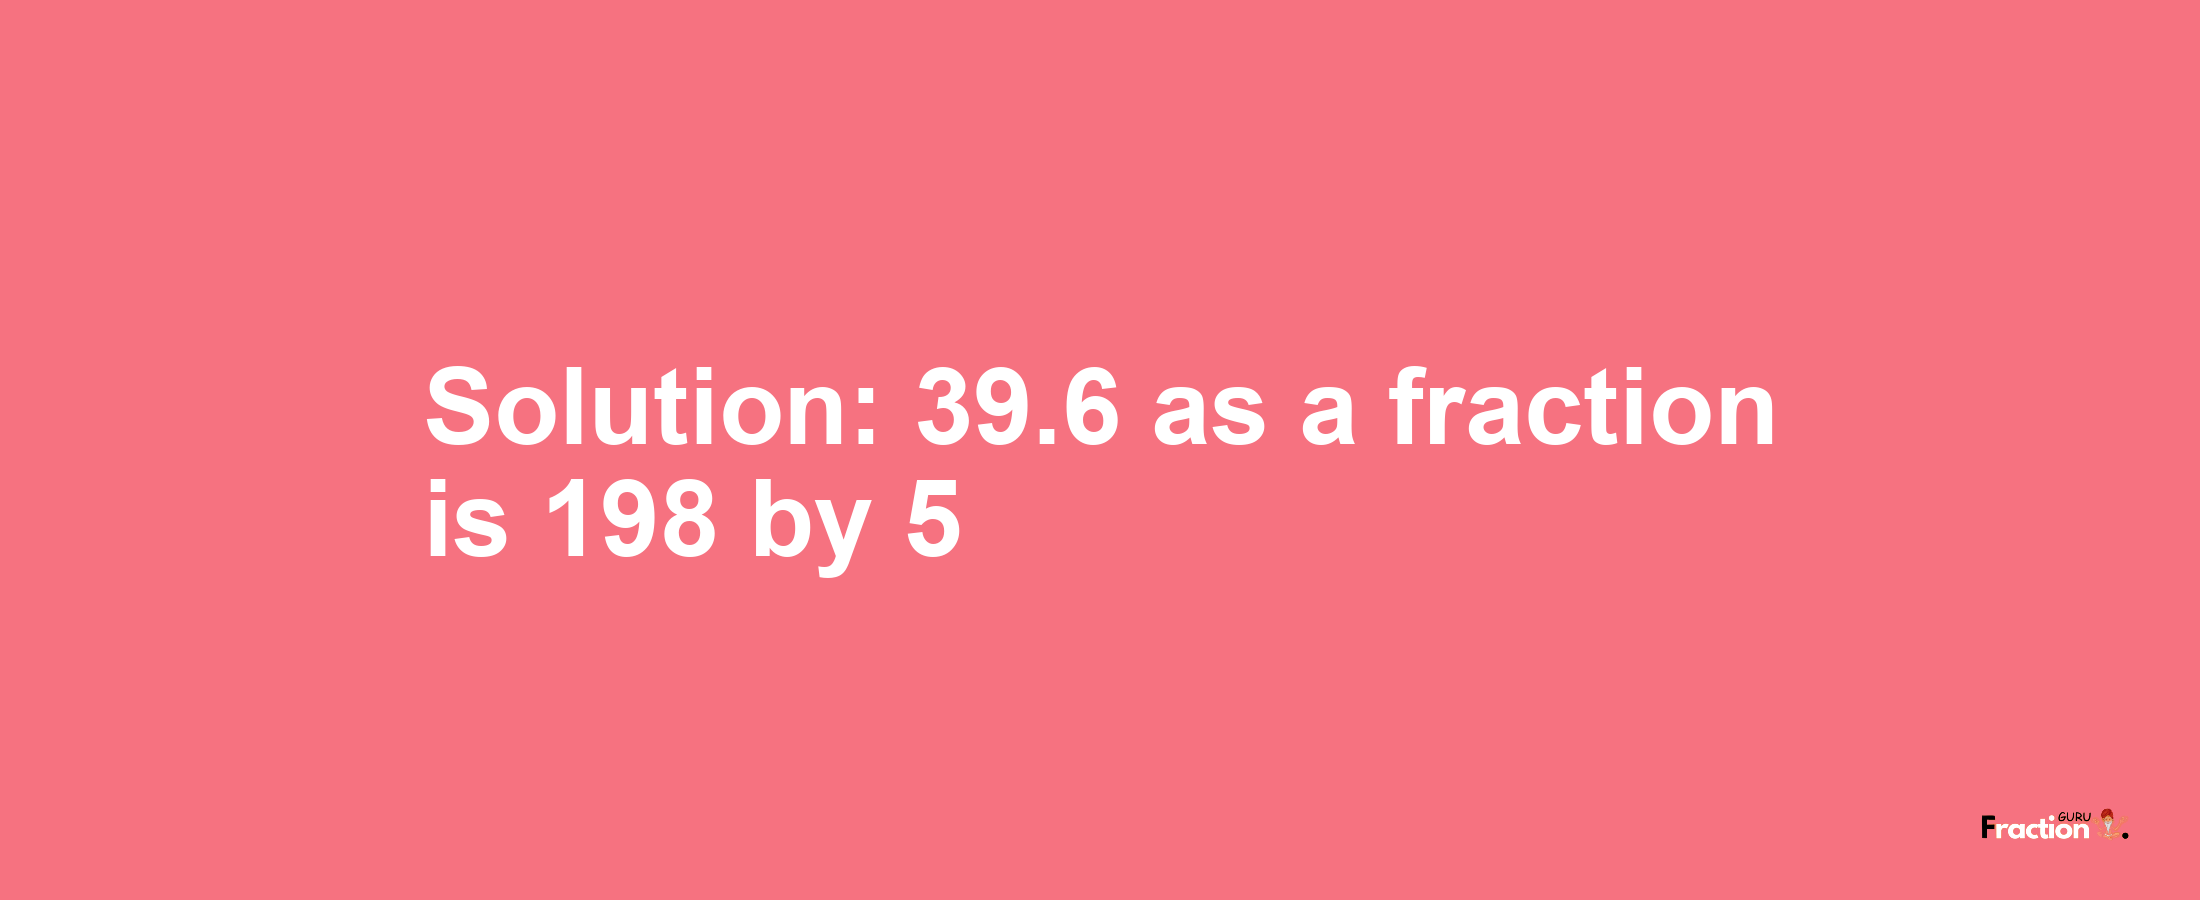 Solution:39.6 as a fraction is 198/5